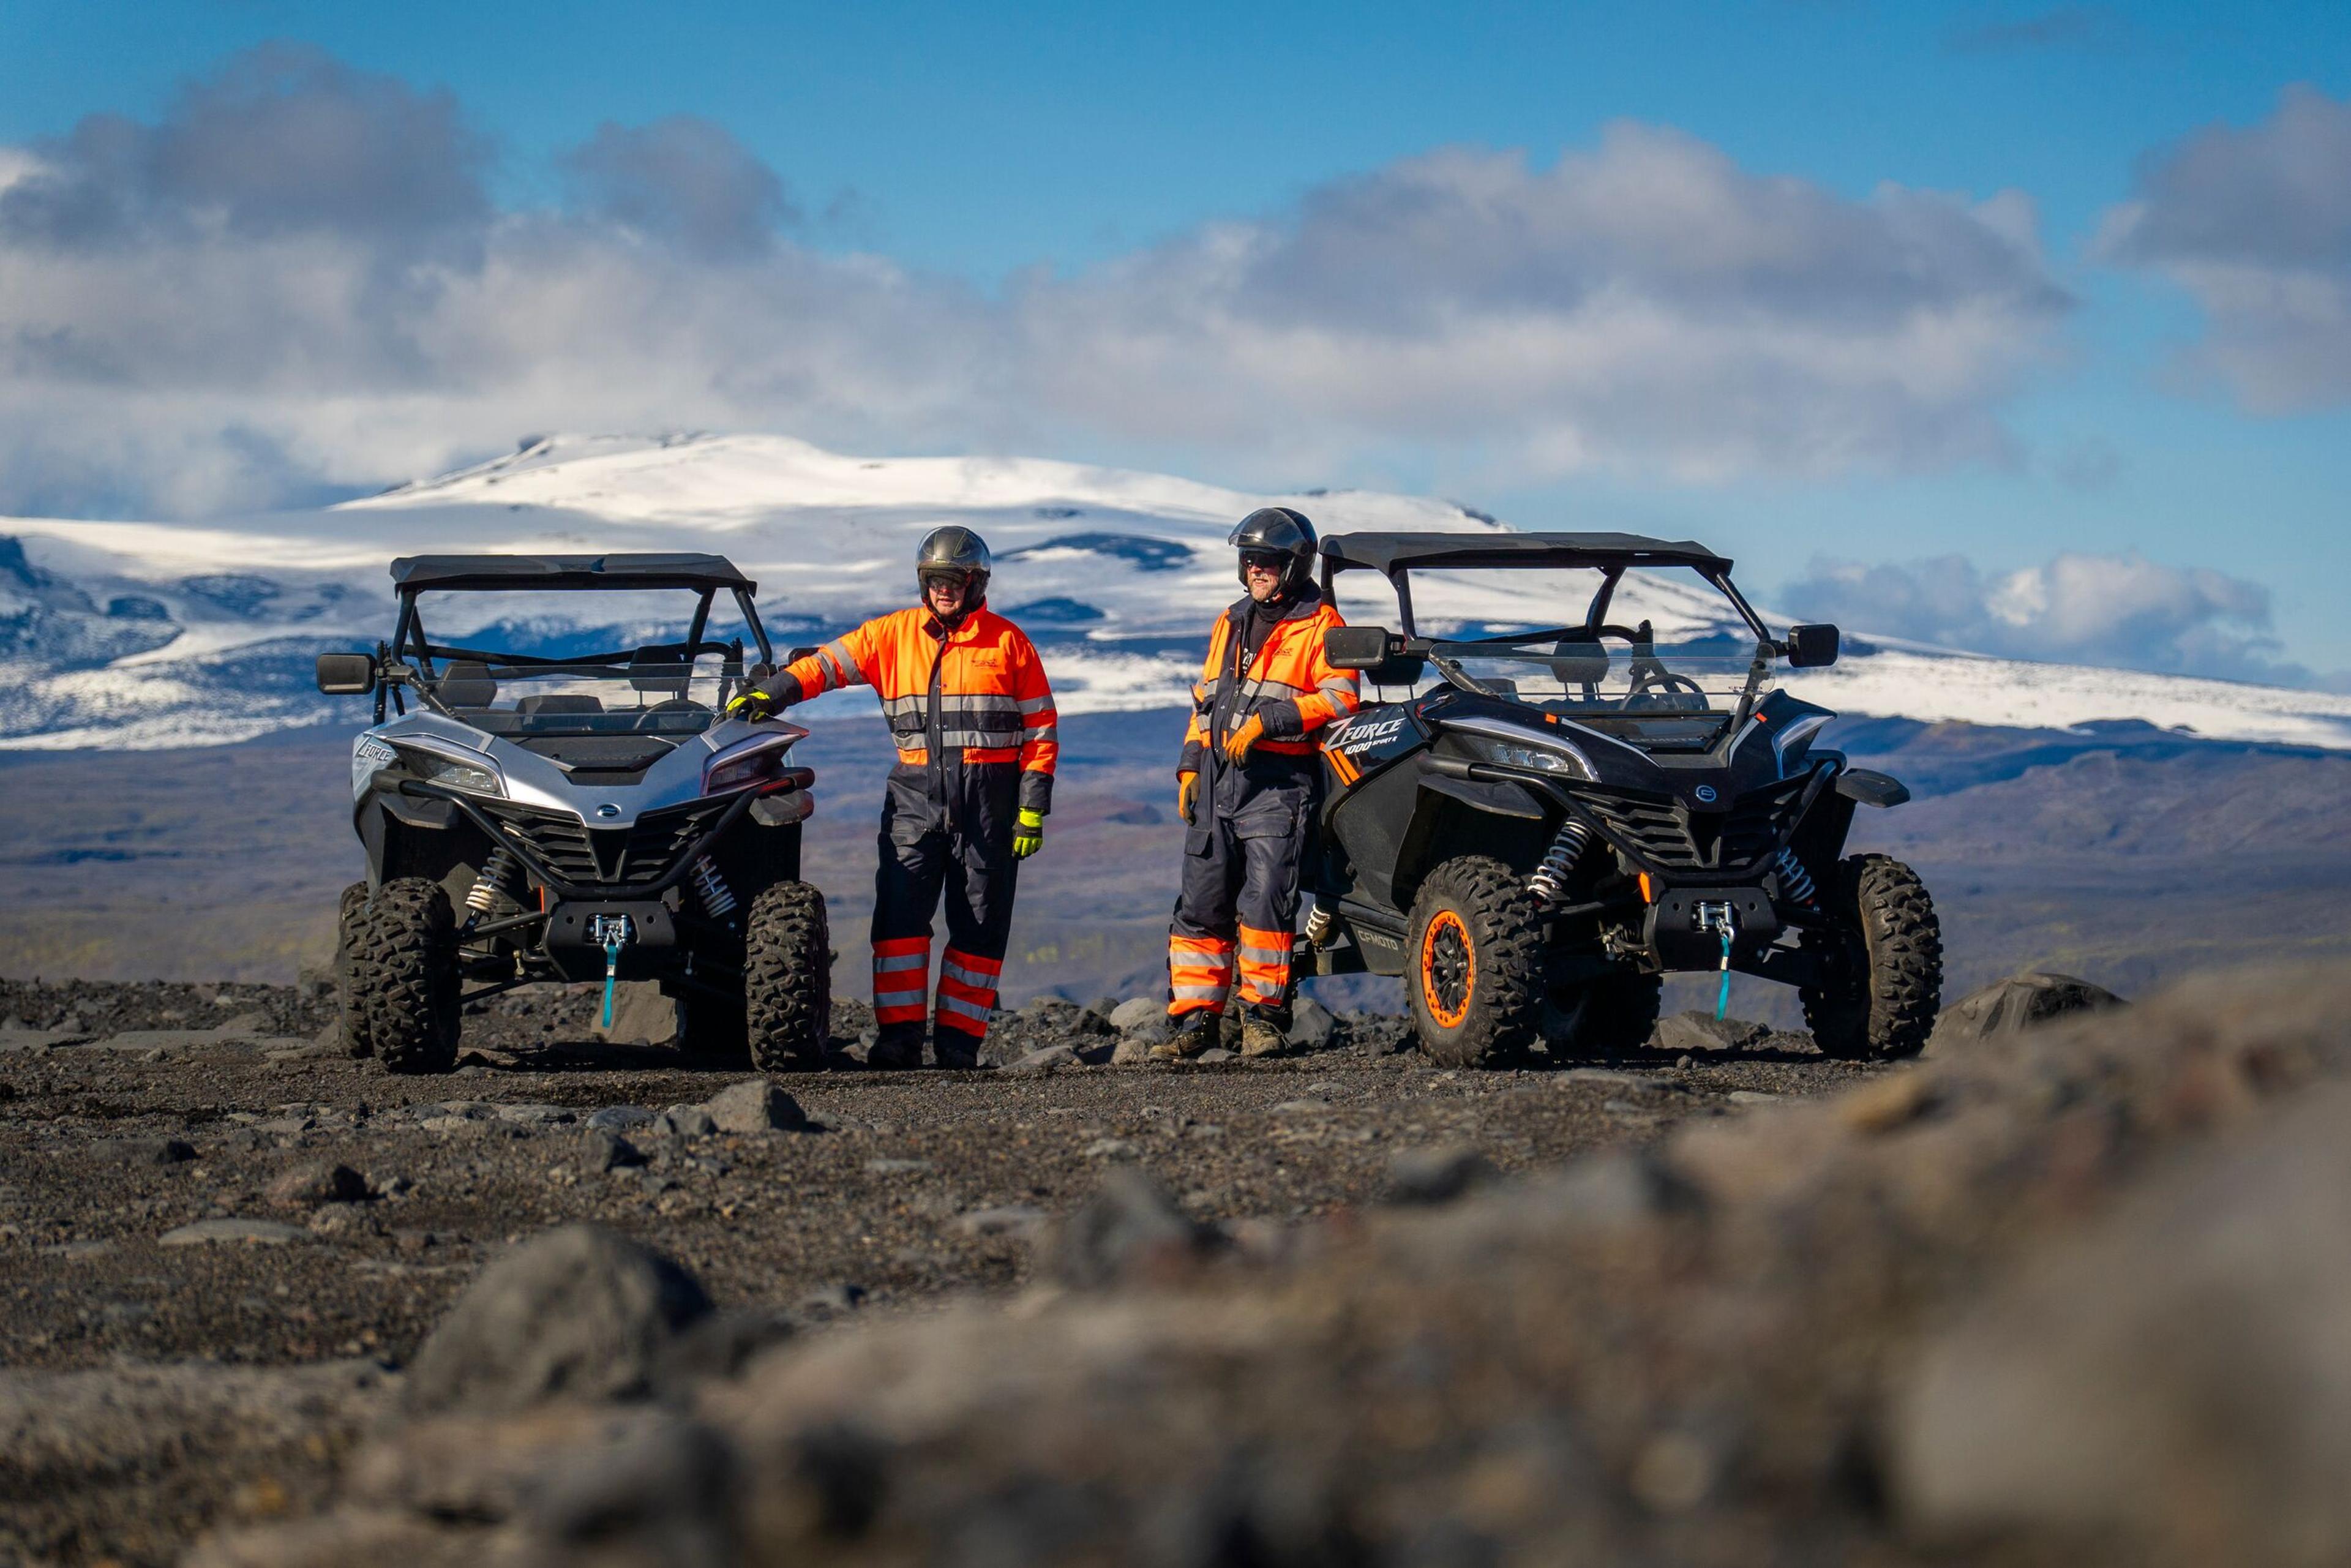 An off-road utility task vehicle (UTV) with two occupants wearing safety gear, including helmets and high-visibility vests, is parked on a rugged terrain with a glacier-topped mountain in the background